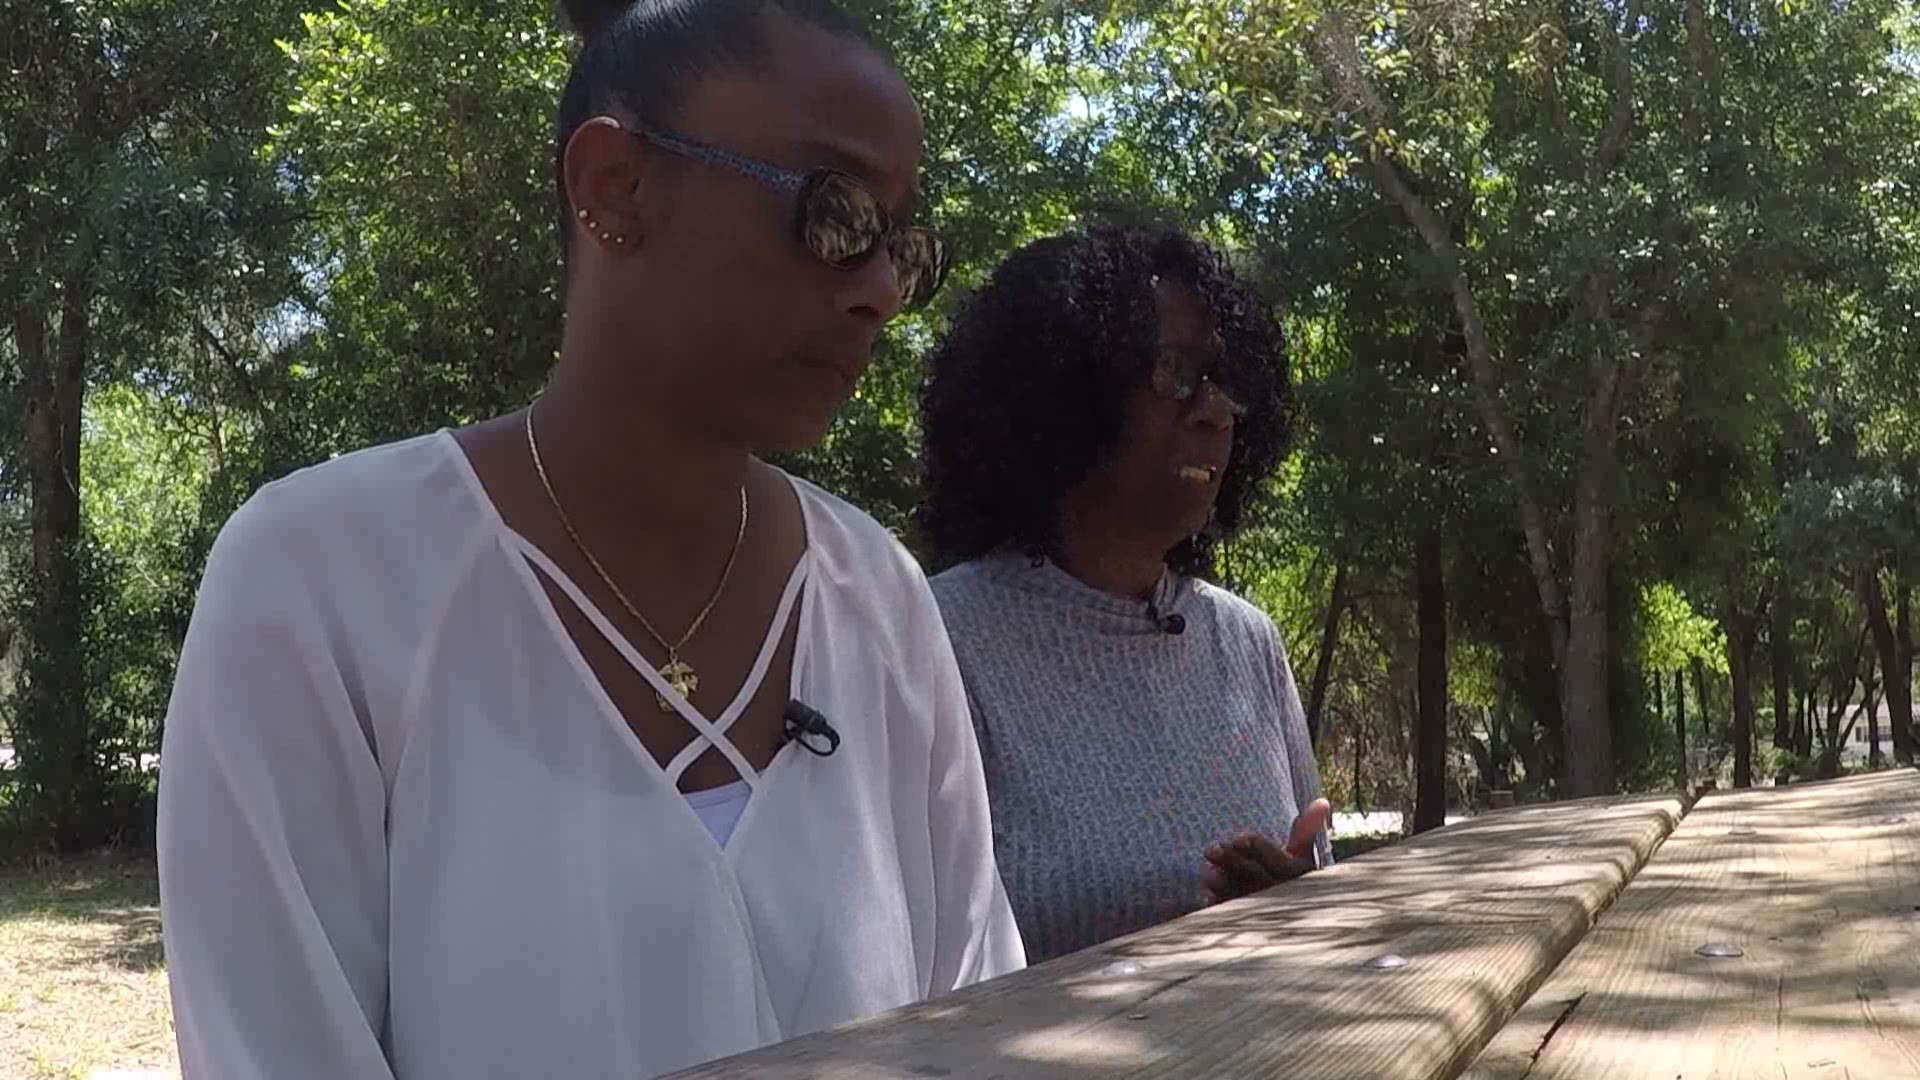 Algalana Douglas and Lula M. Williams react to their loved one's killer being scheduled to die.